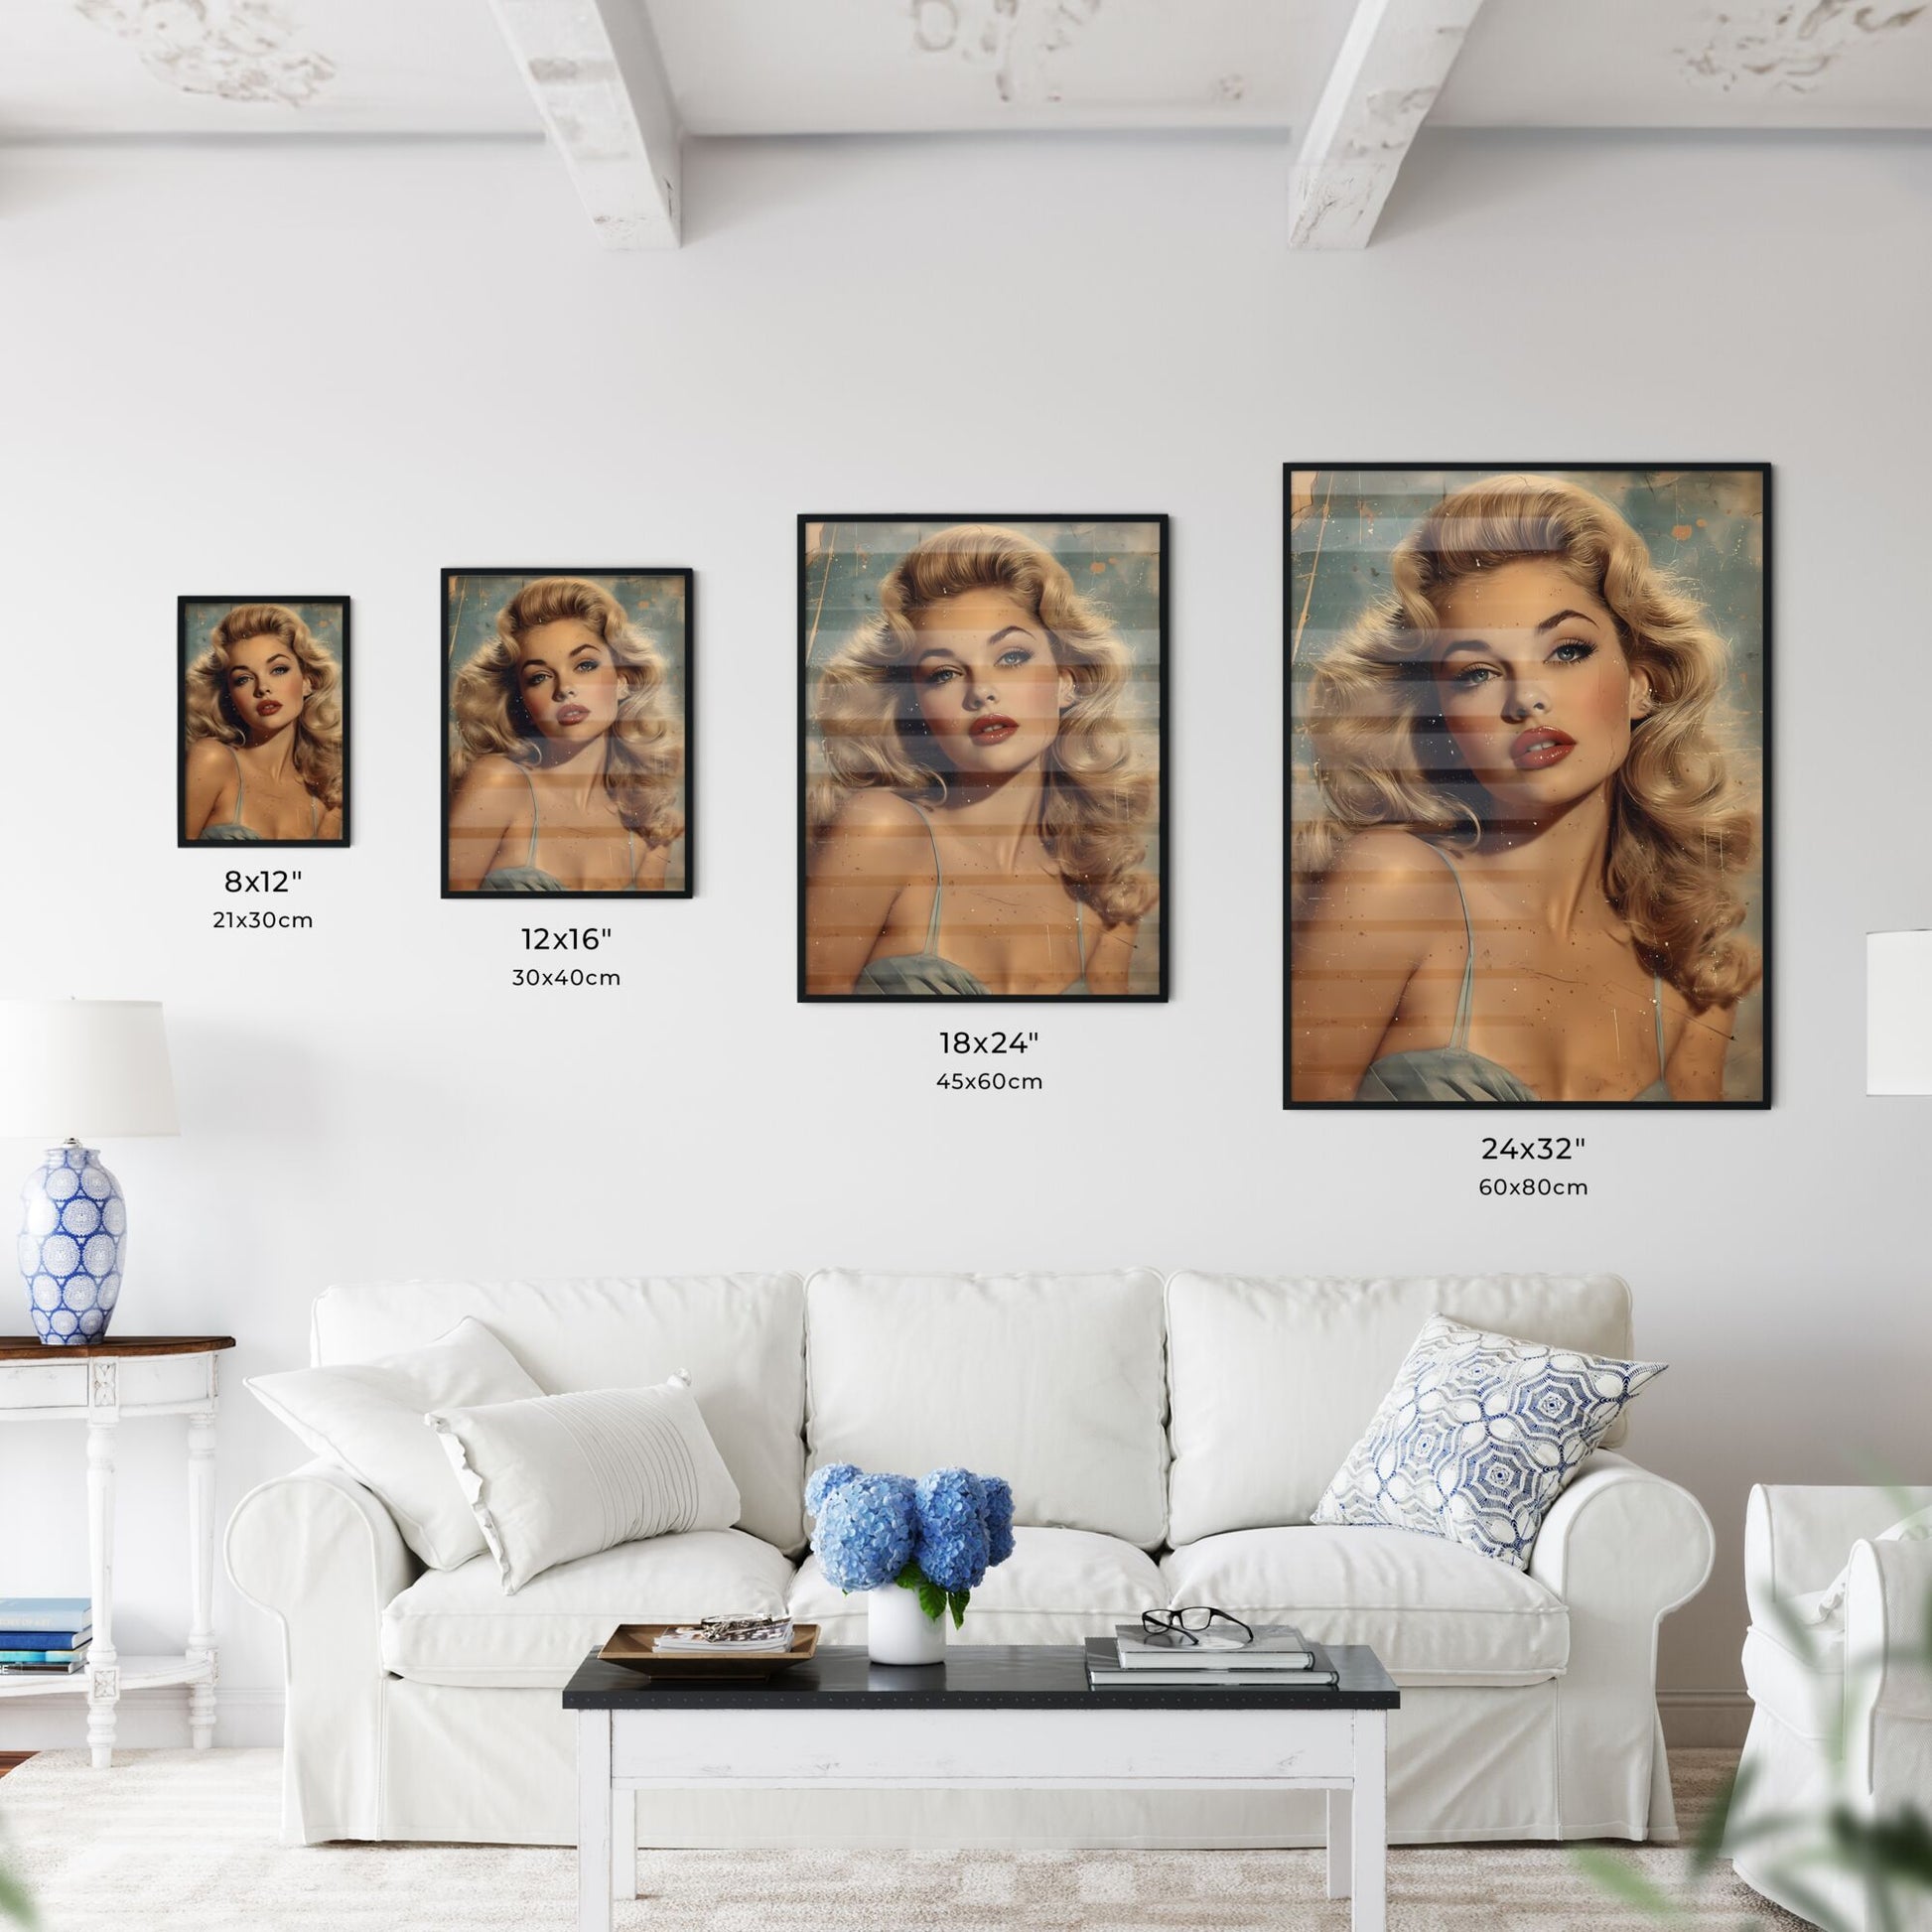 1959 pin up girl - Art print of a woman with blonde hair and red lipstick Default Title